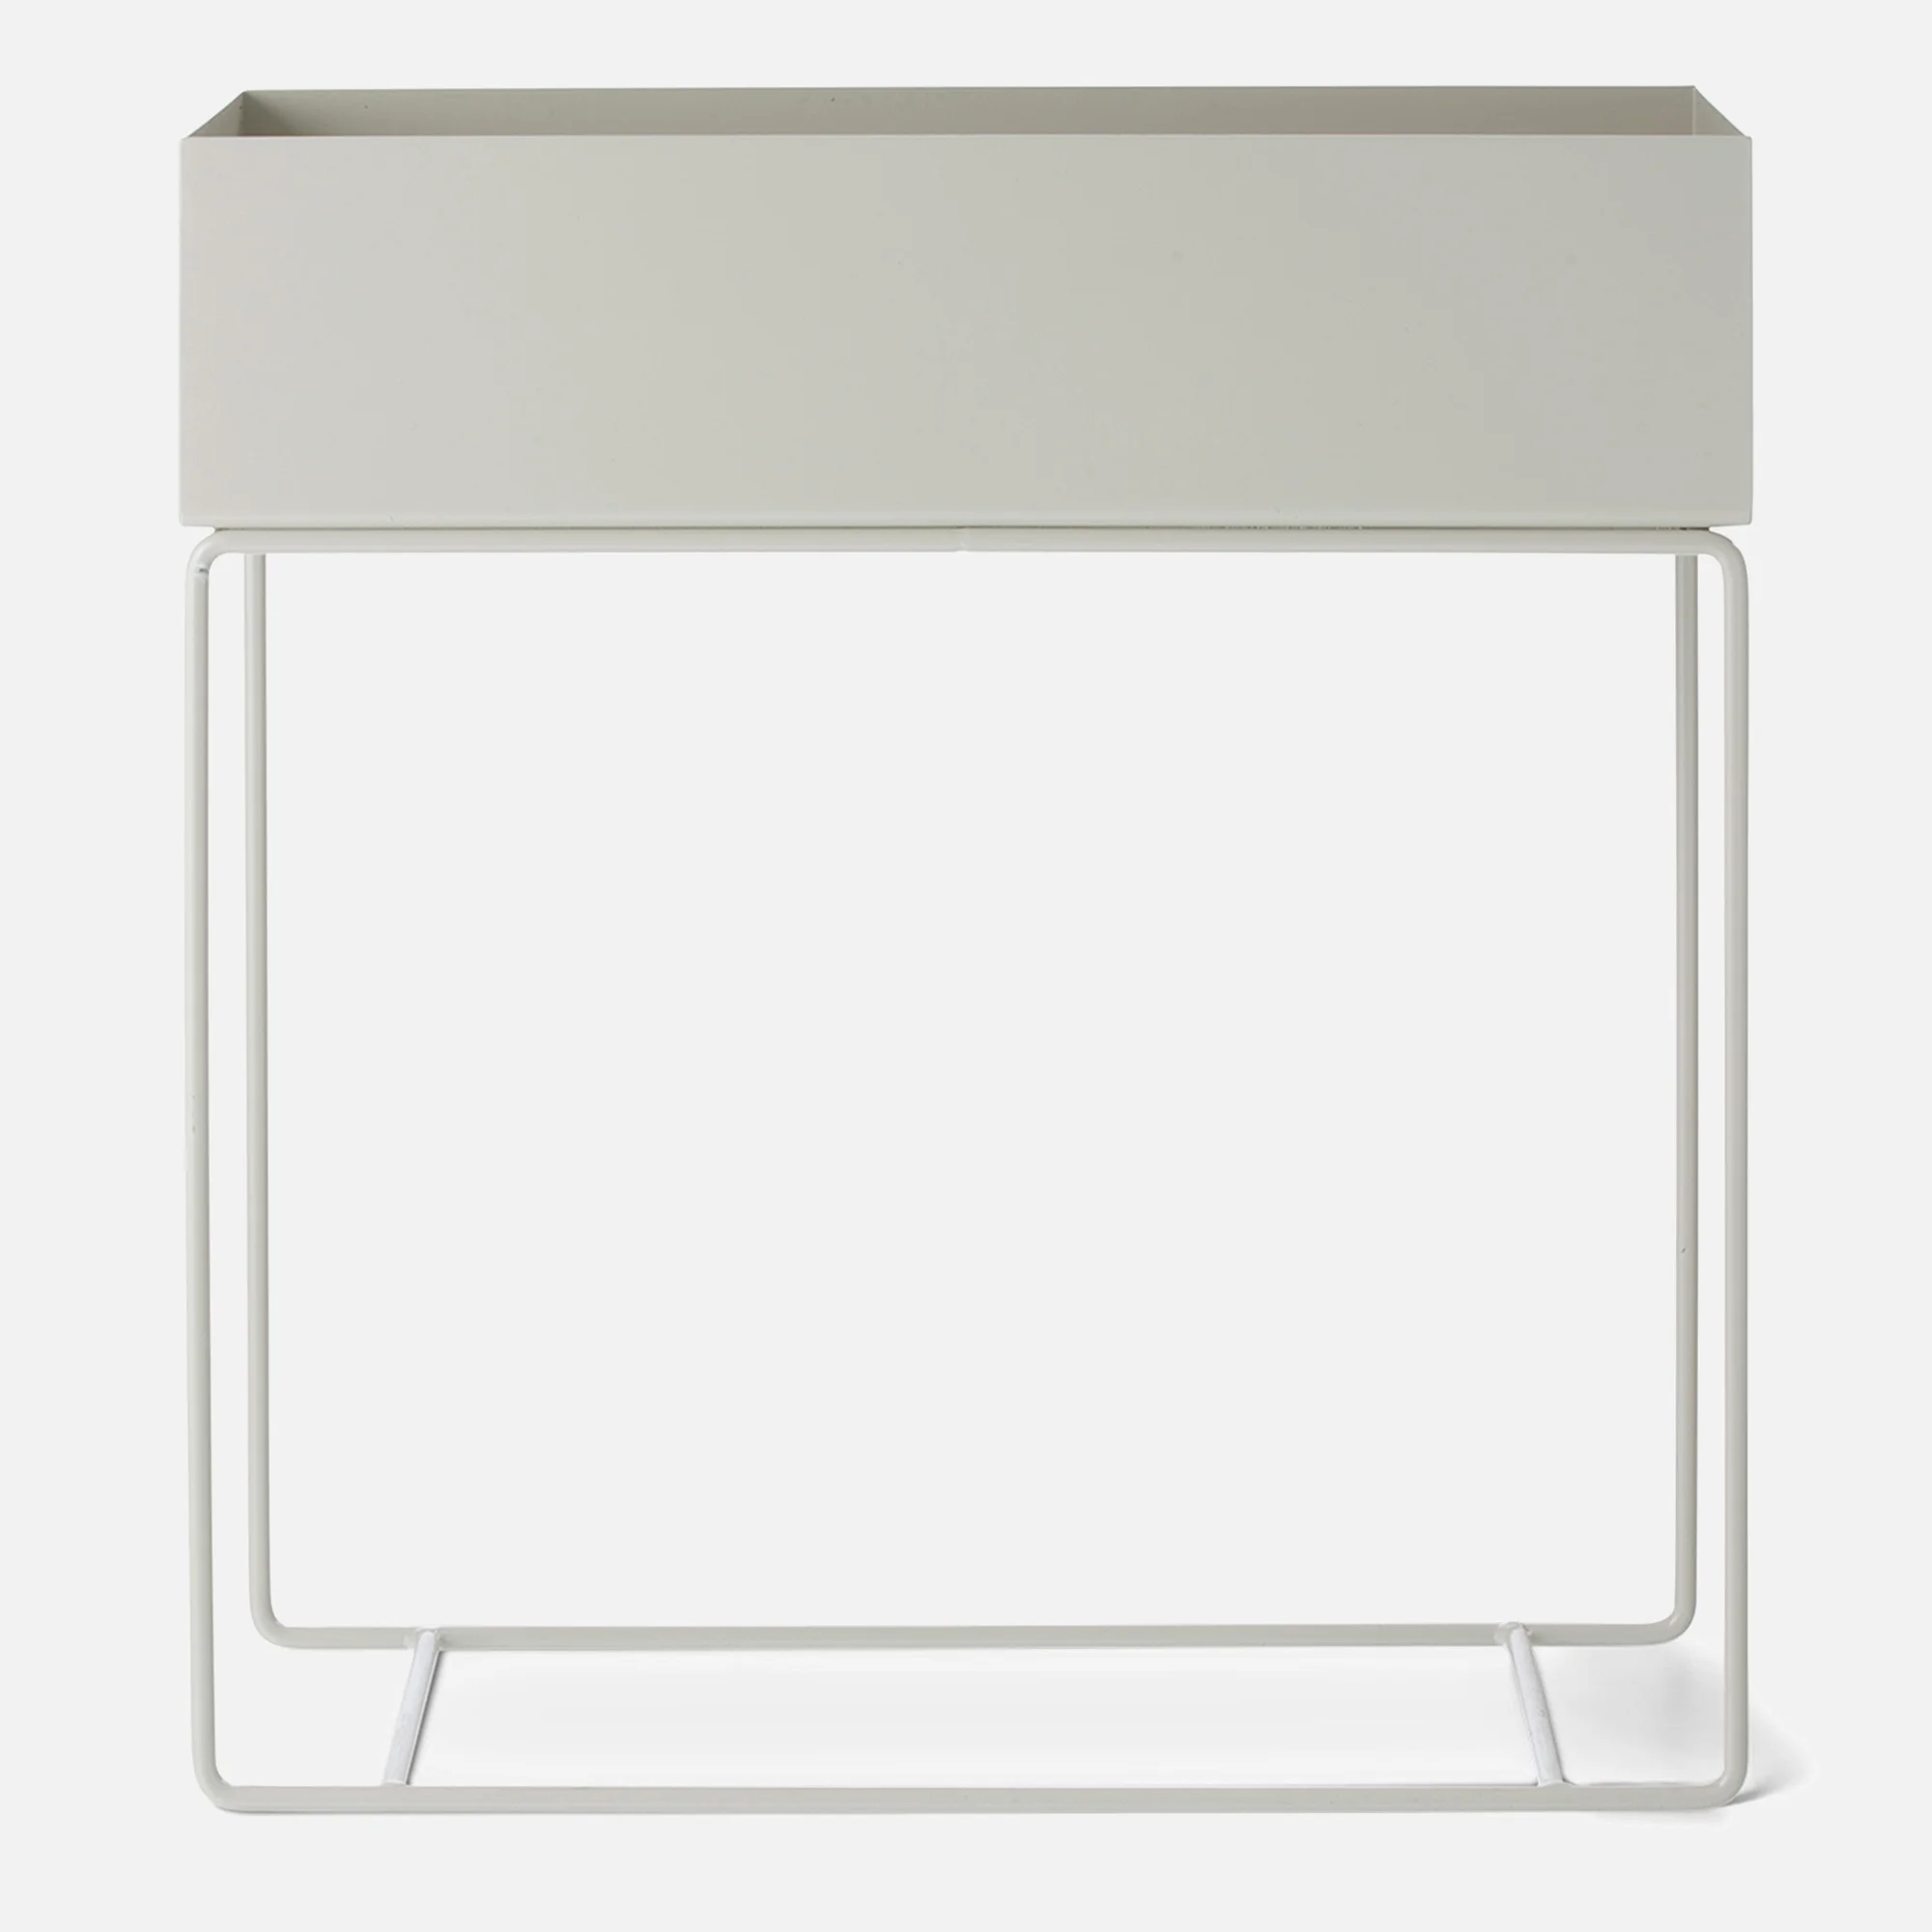 Ferm Living Plant Box and Side Table - Light Grey Image 1